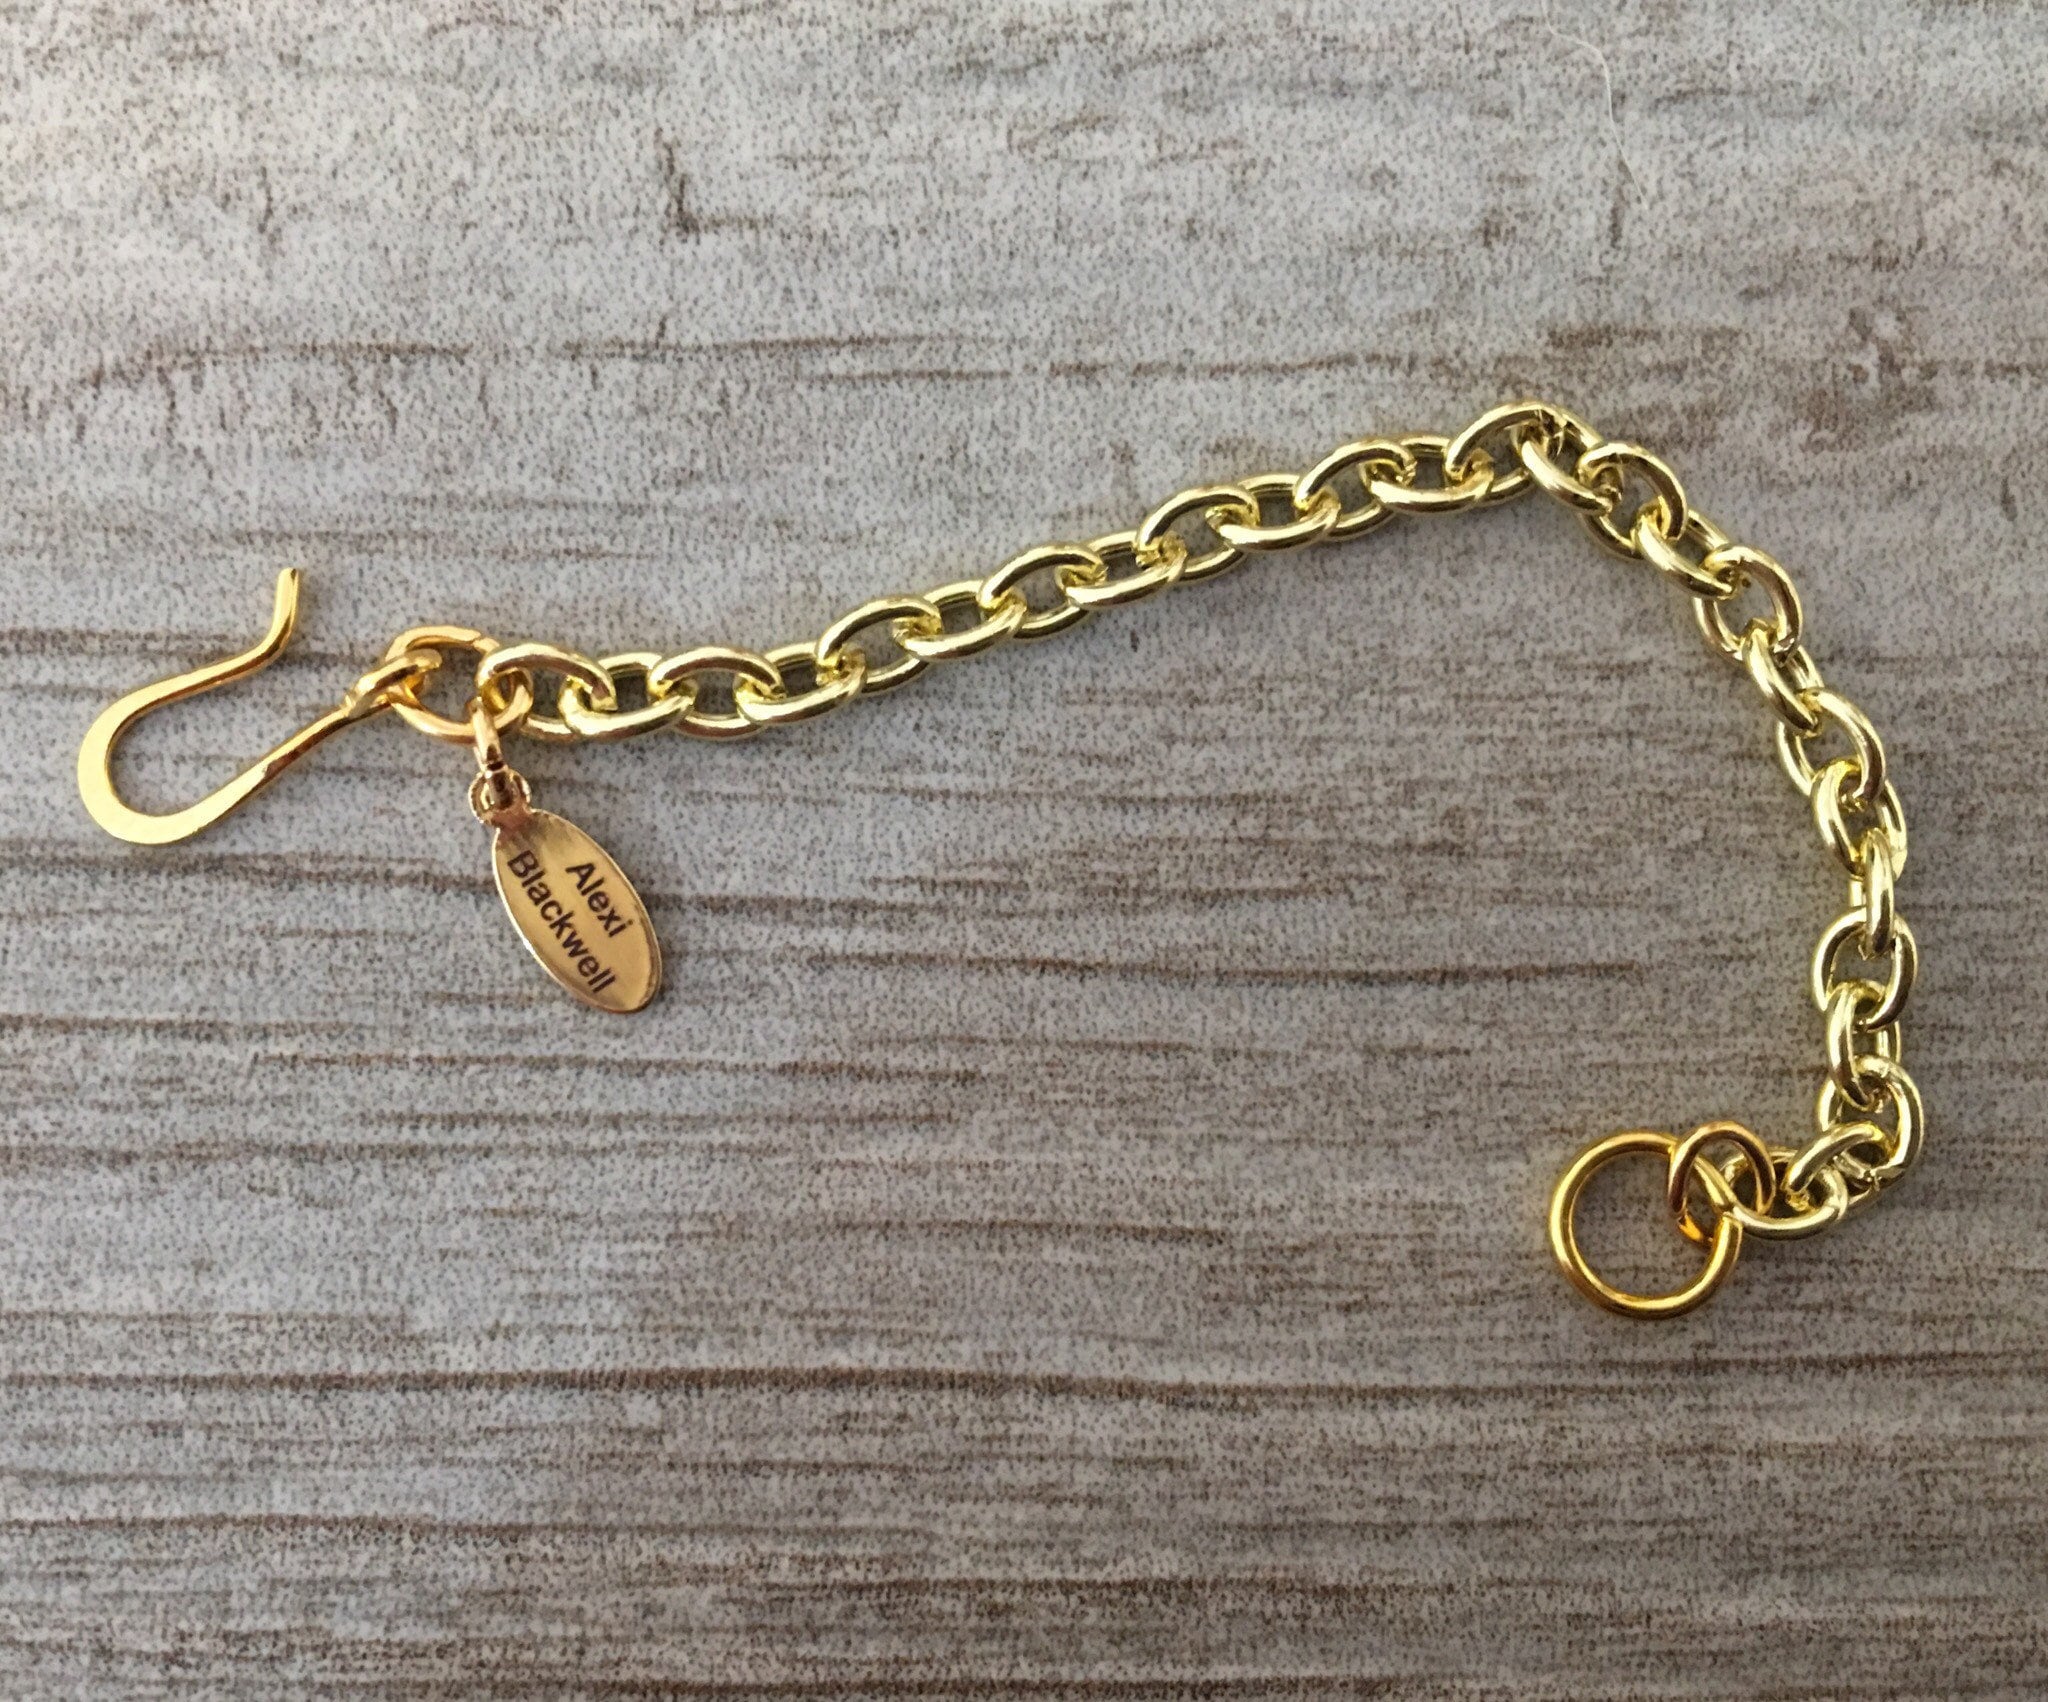 Gold Necklace Extender Heavier Chain With Hook Clasp in Gold or Silver to  Lengthen Your Short Necklace to Wear More Comfortably 